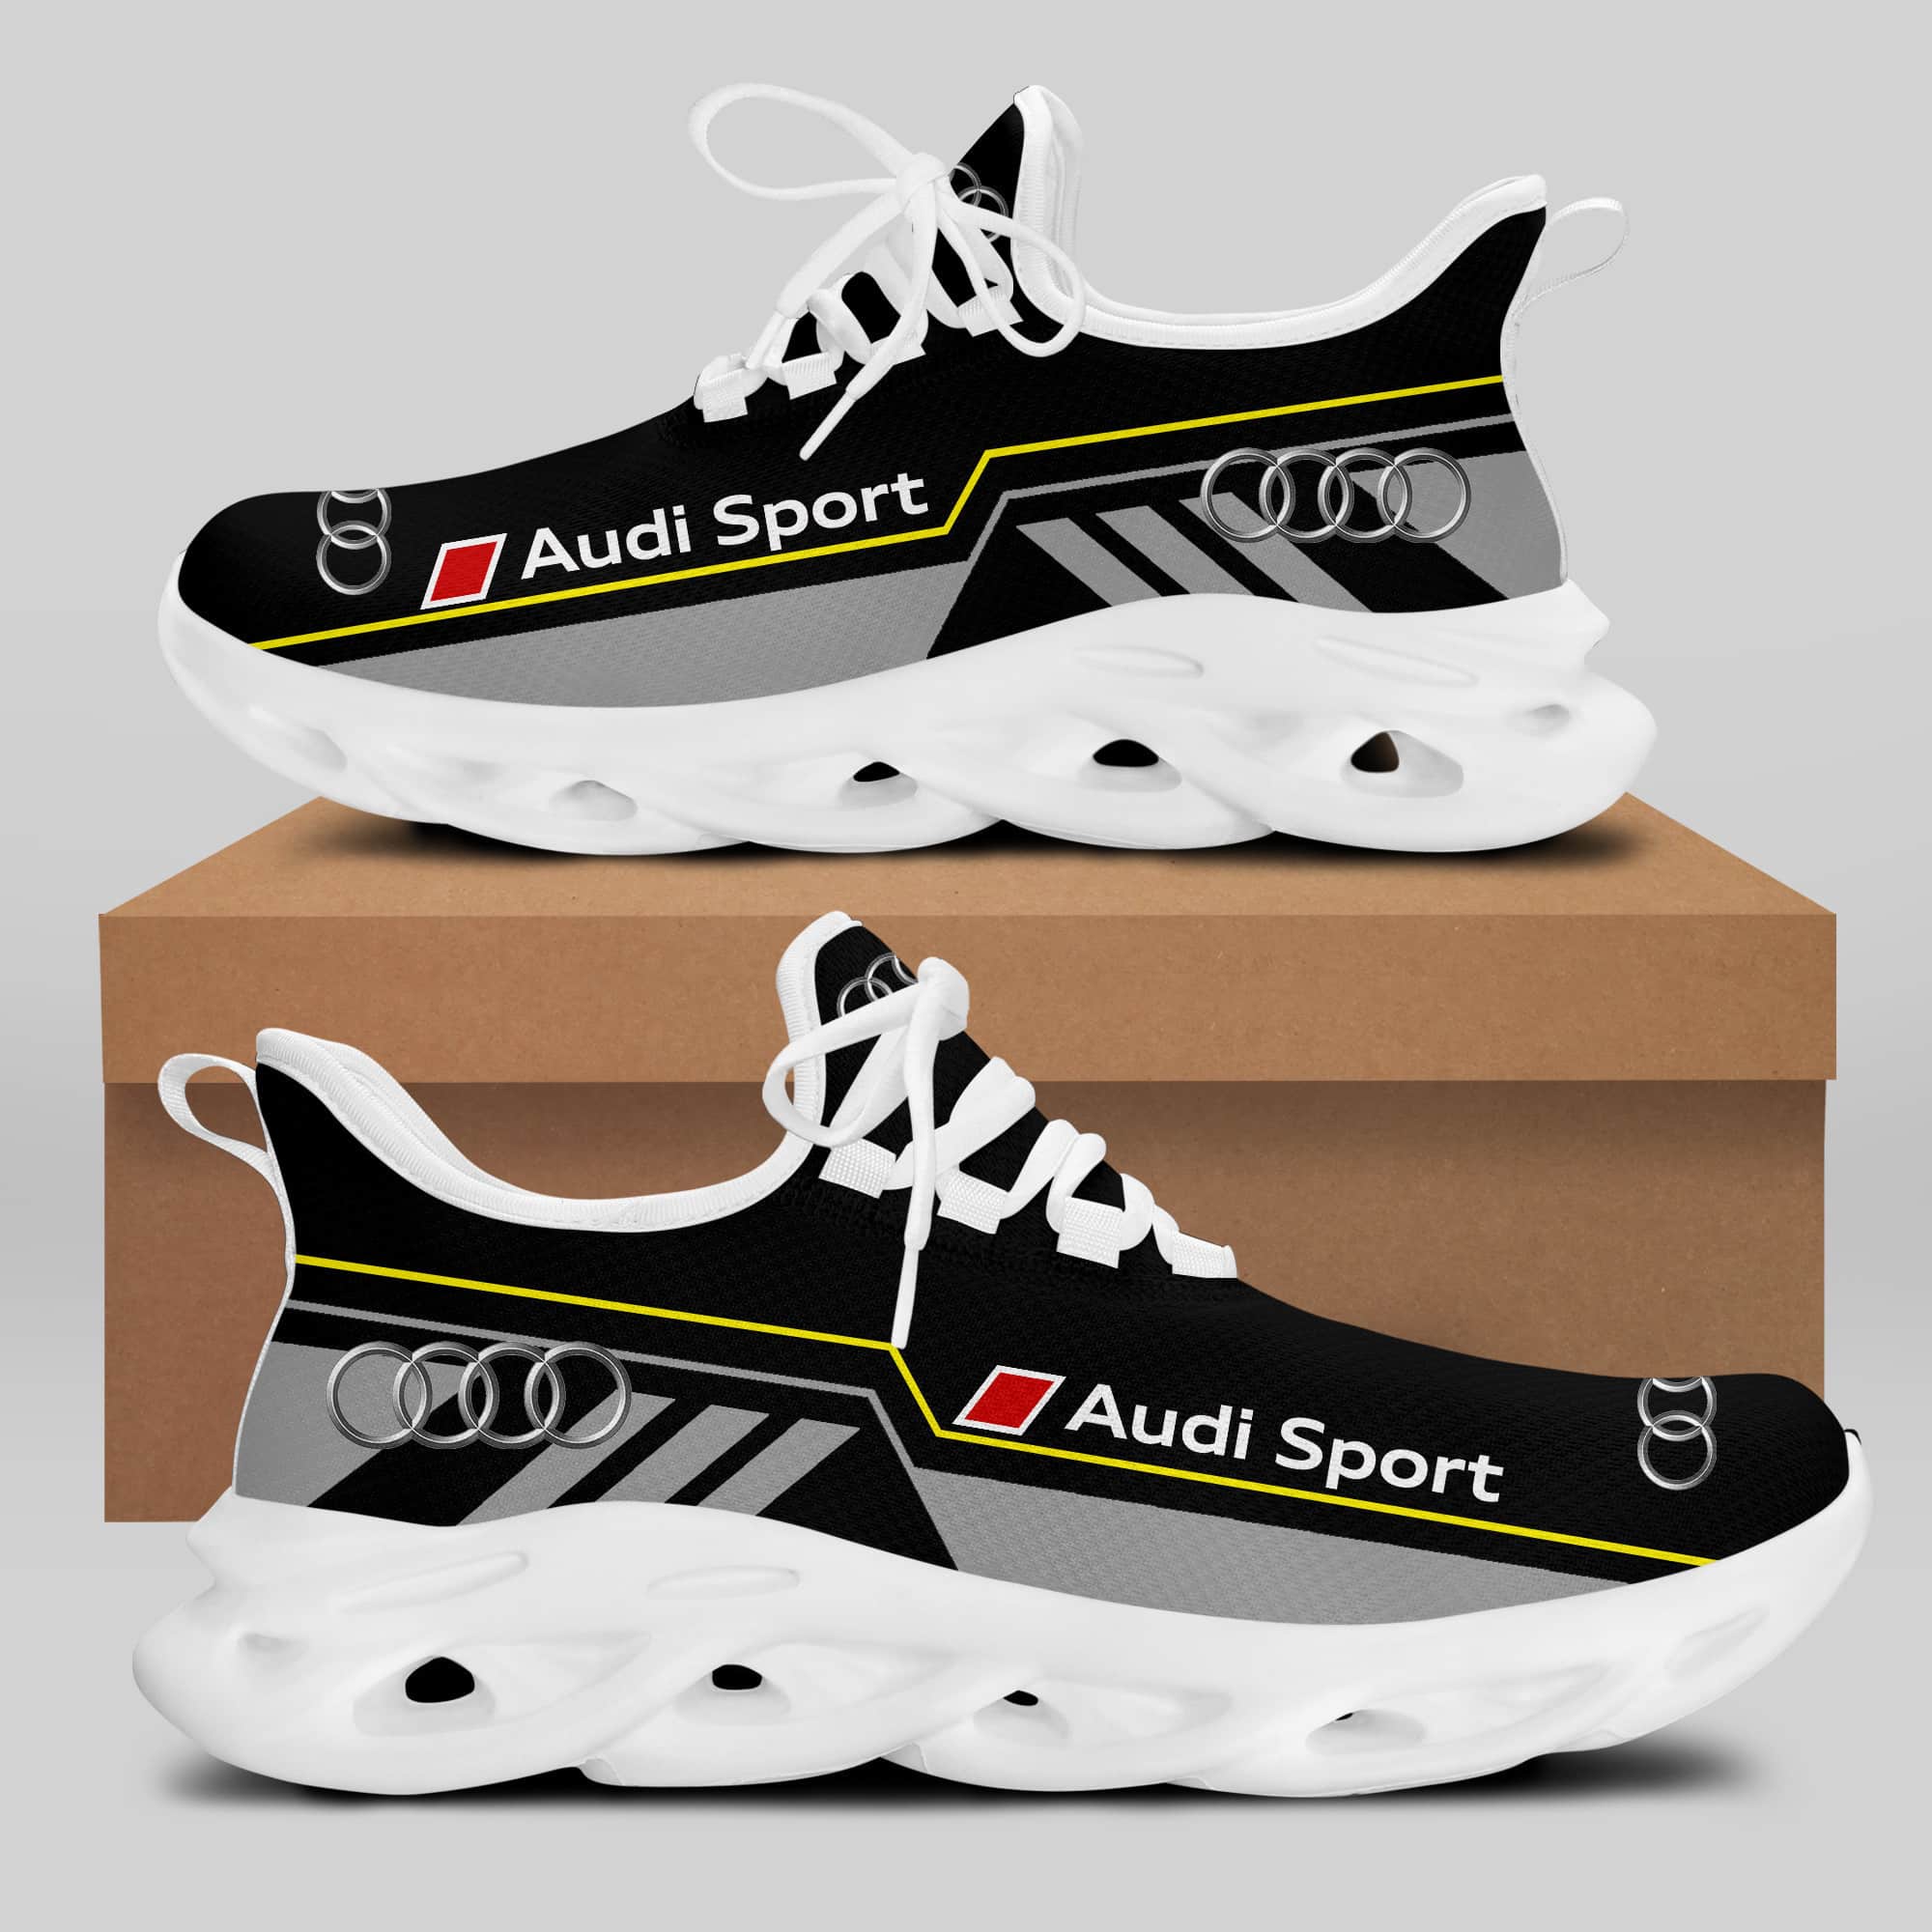 Audi Sport Running Shoes Max Soul Shoes Sneakers Ver 36 2